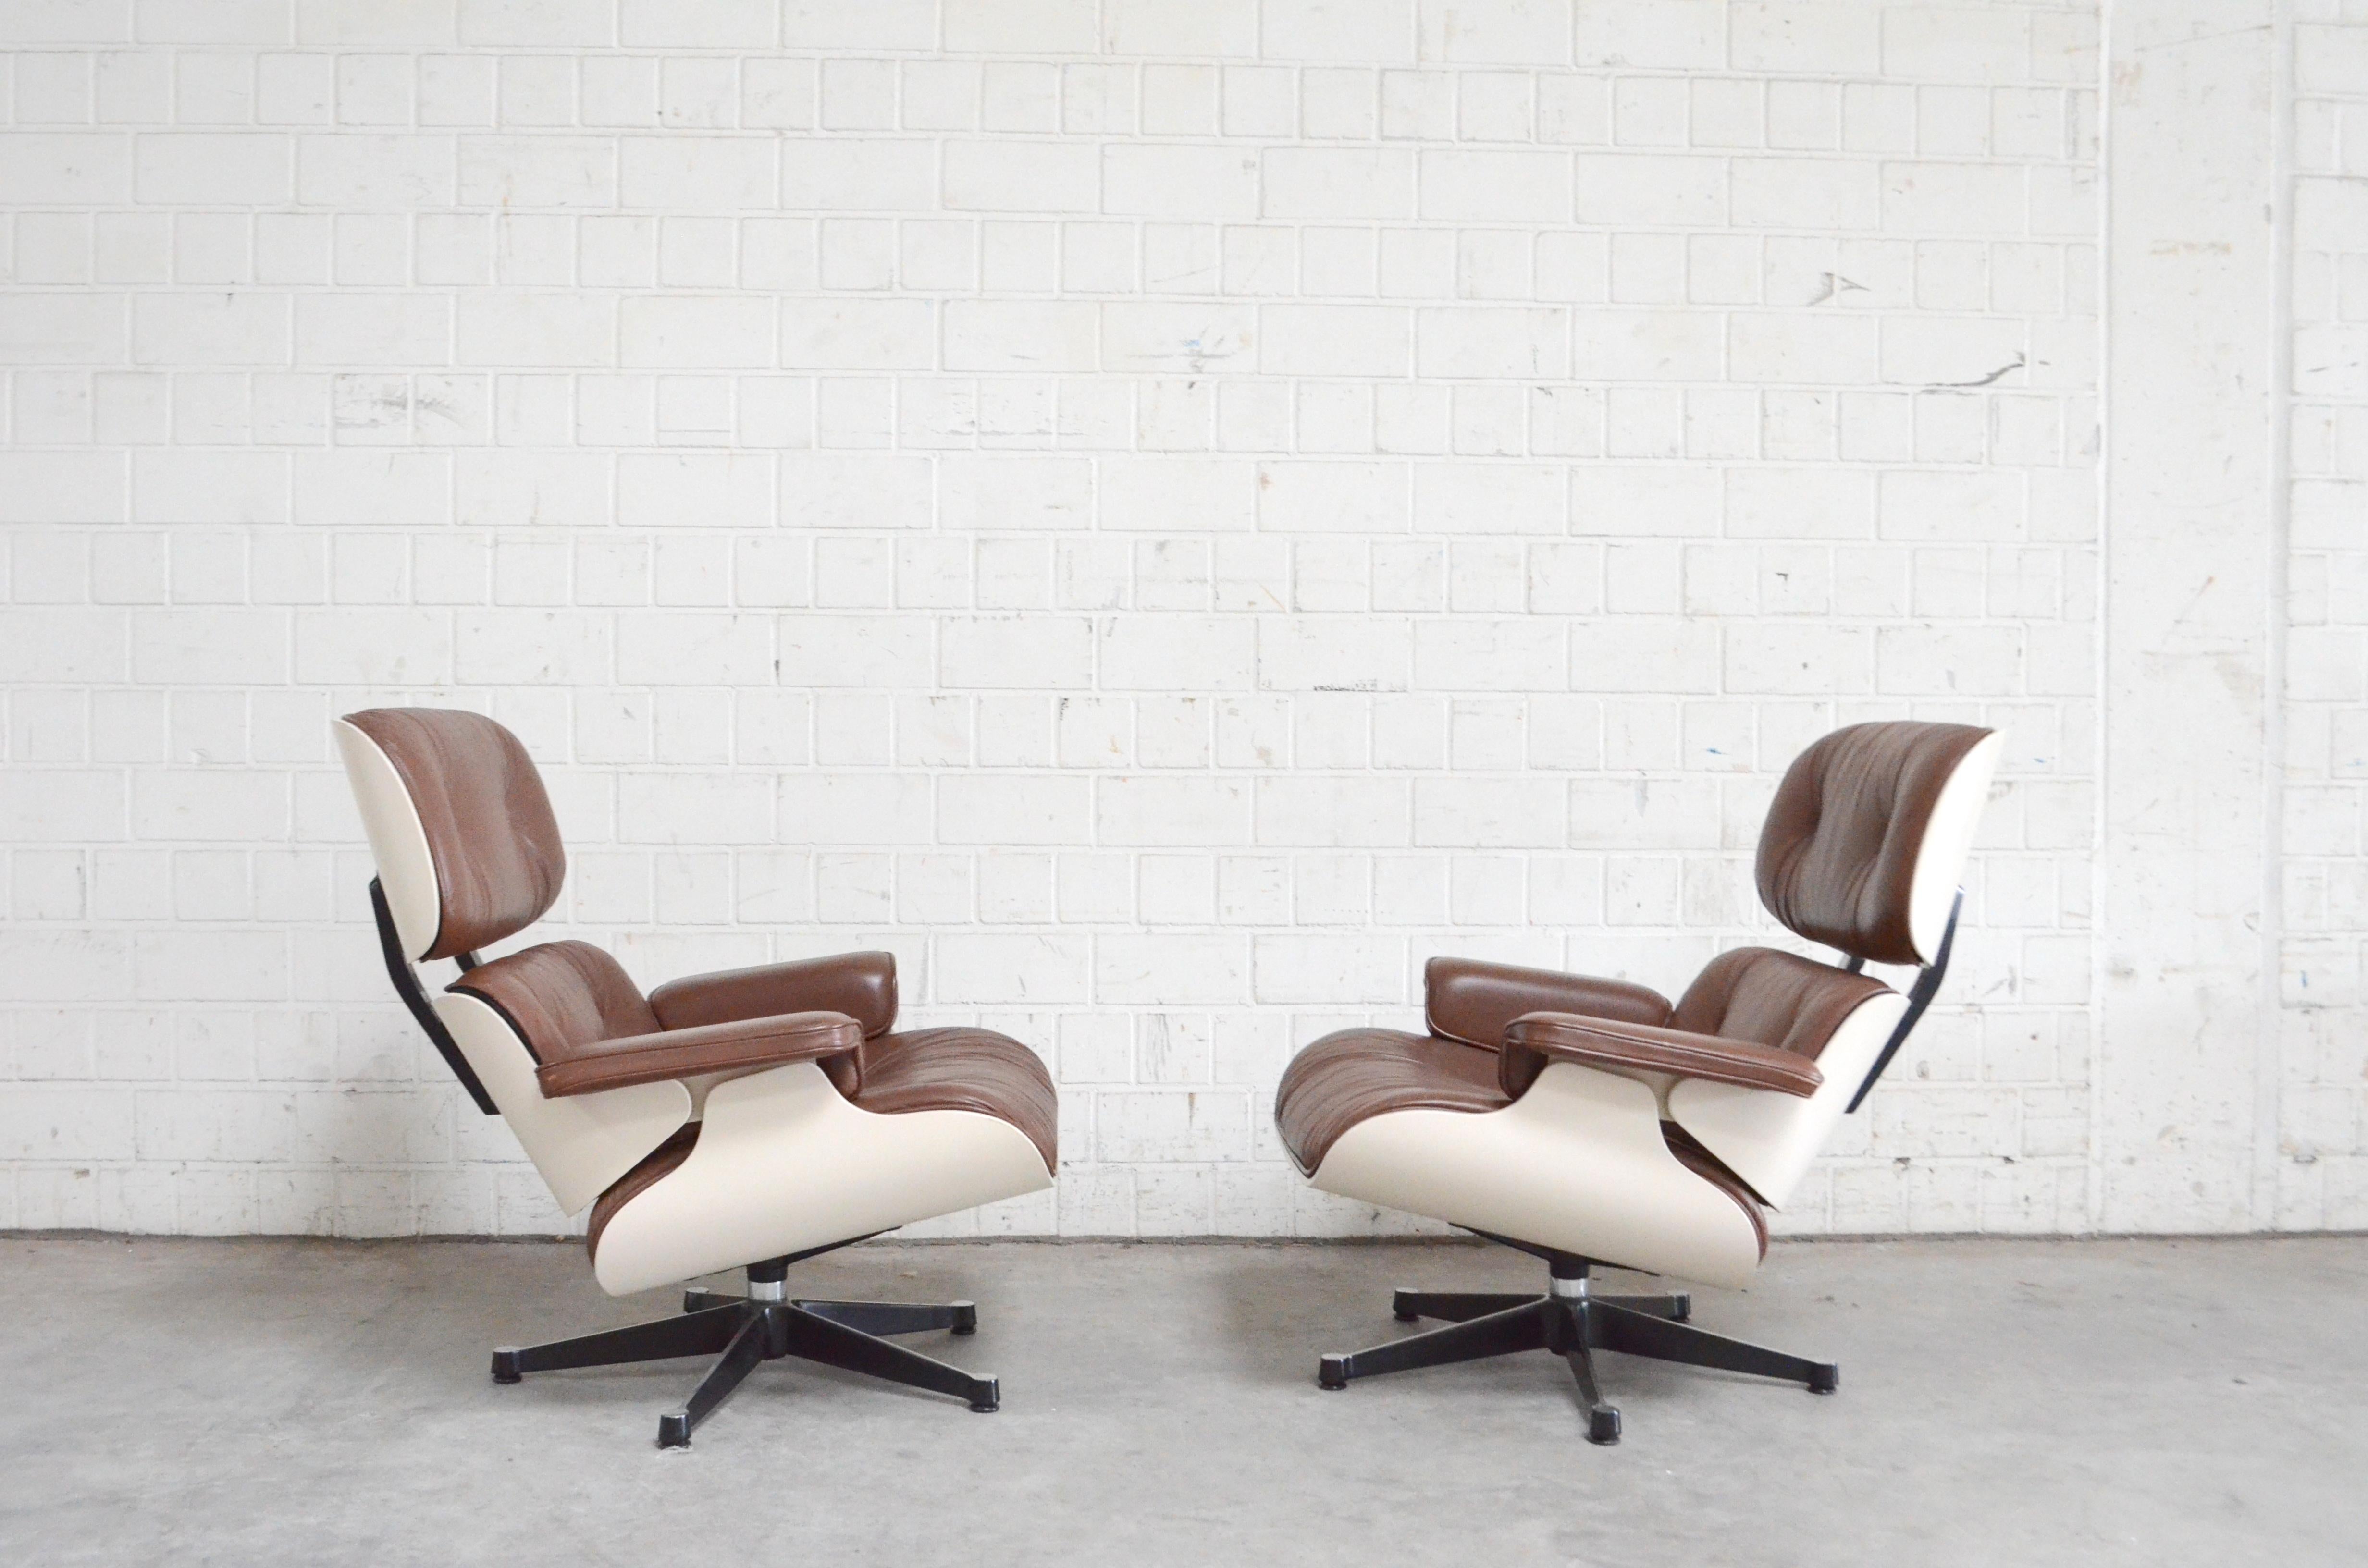 Mid-Century Modern Vitra Eames Lounge Chair Cognac Brown and White Shell, Set of 2 For Sale